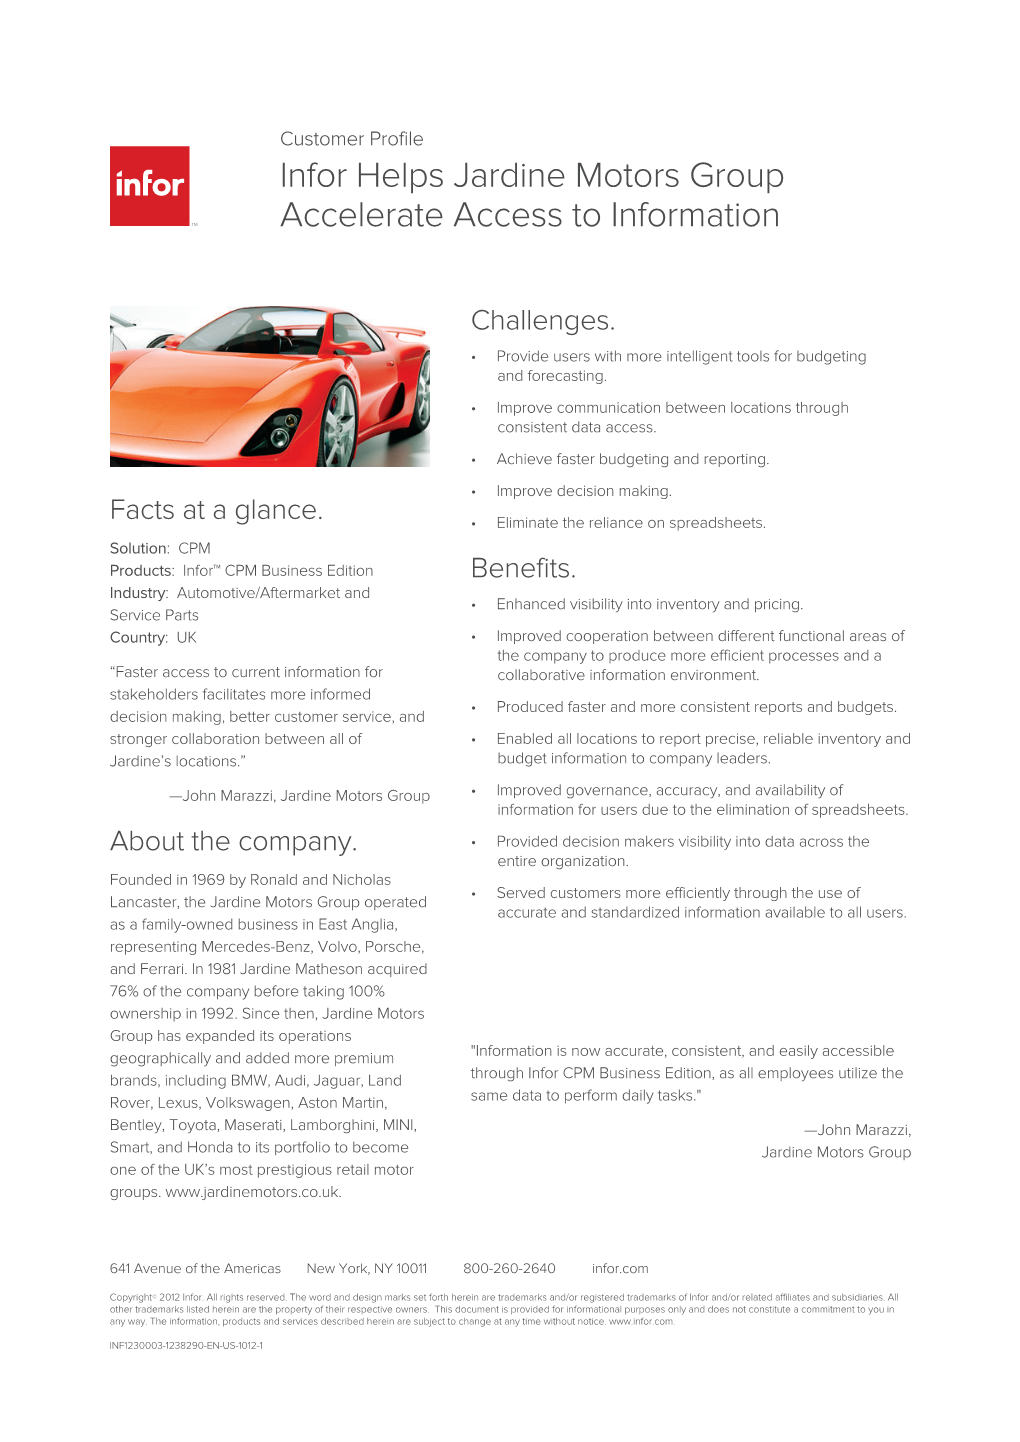 Infor Helps Jardine Motors Group Accelerate Access to Information